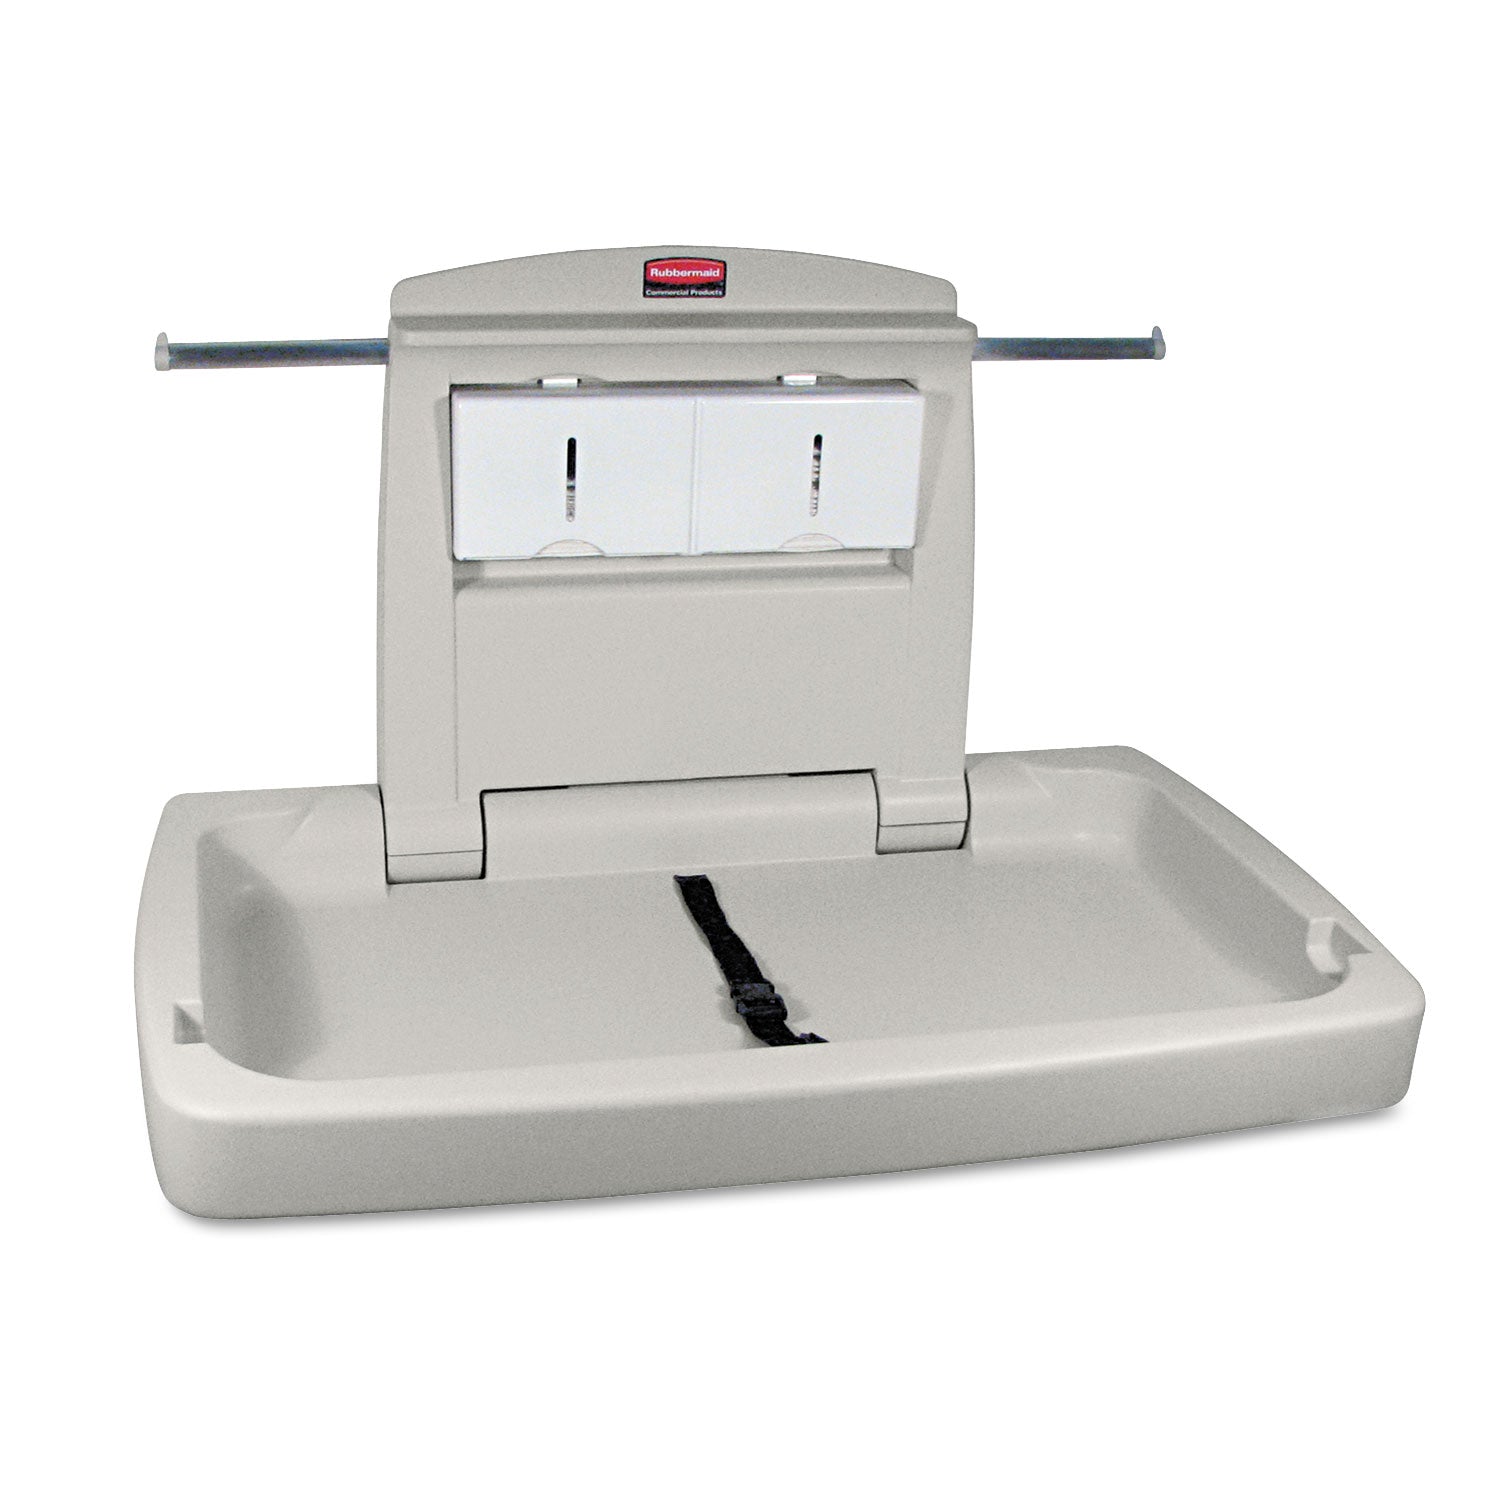 Sturdy Station 2 Baby Changing Table, 33.5 x 21.5, Platinum - 